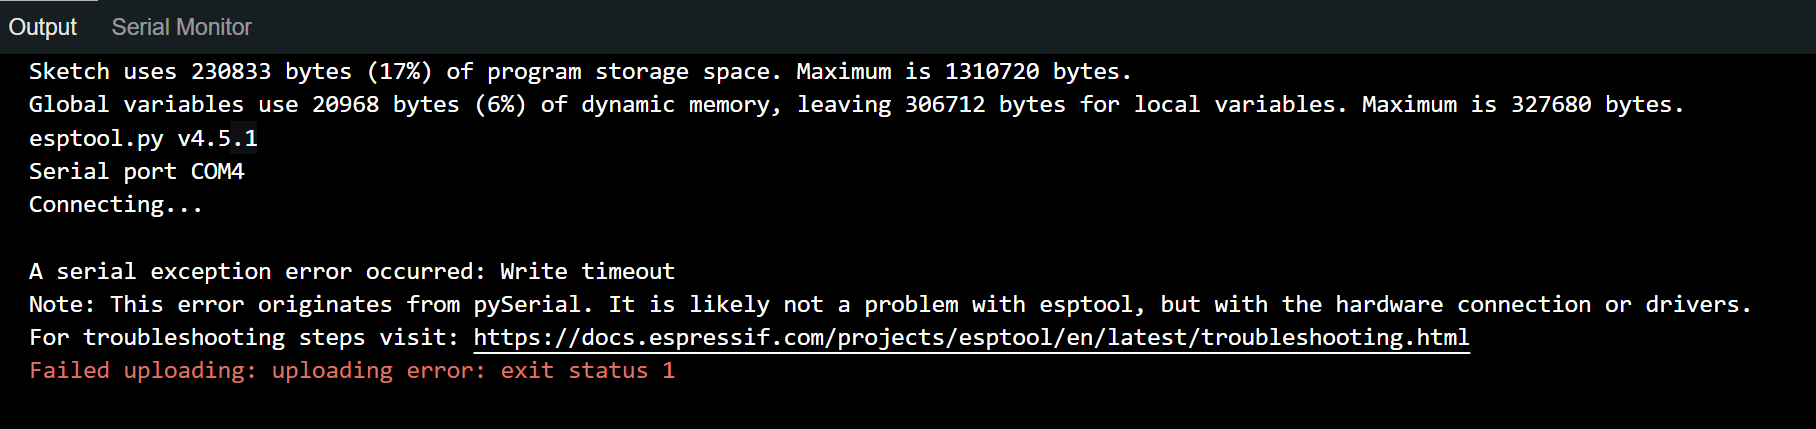 Sketch uses 230833 bytes (17%) of program storage space. Maximum is 1310720 bytes. Global variables use 20968 bytes (6%) of dynamic memory, leaving 306712 bytes for local variables. Maximum is 327680 bytes. esptool.py v4.5.1 Serial port COM4 Connecting... A serial exception error occurred: Write timeout Note: This error originates from pySerial. It is likely not a problem with esptool, but with the hardware connection or drivers. For troubleshooting steps visit: https://docs.espressif.com/projects/esptool/en/latest/troubleshooting.html Failed uploading: uploading error: exit status 1